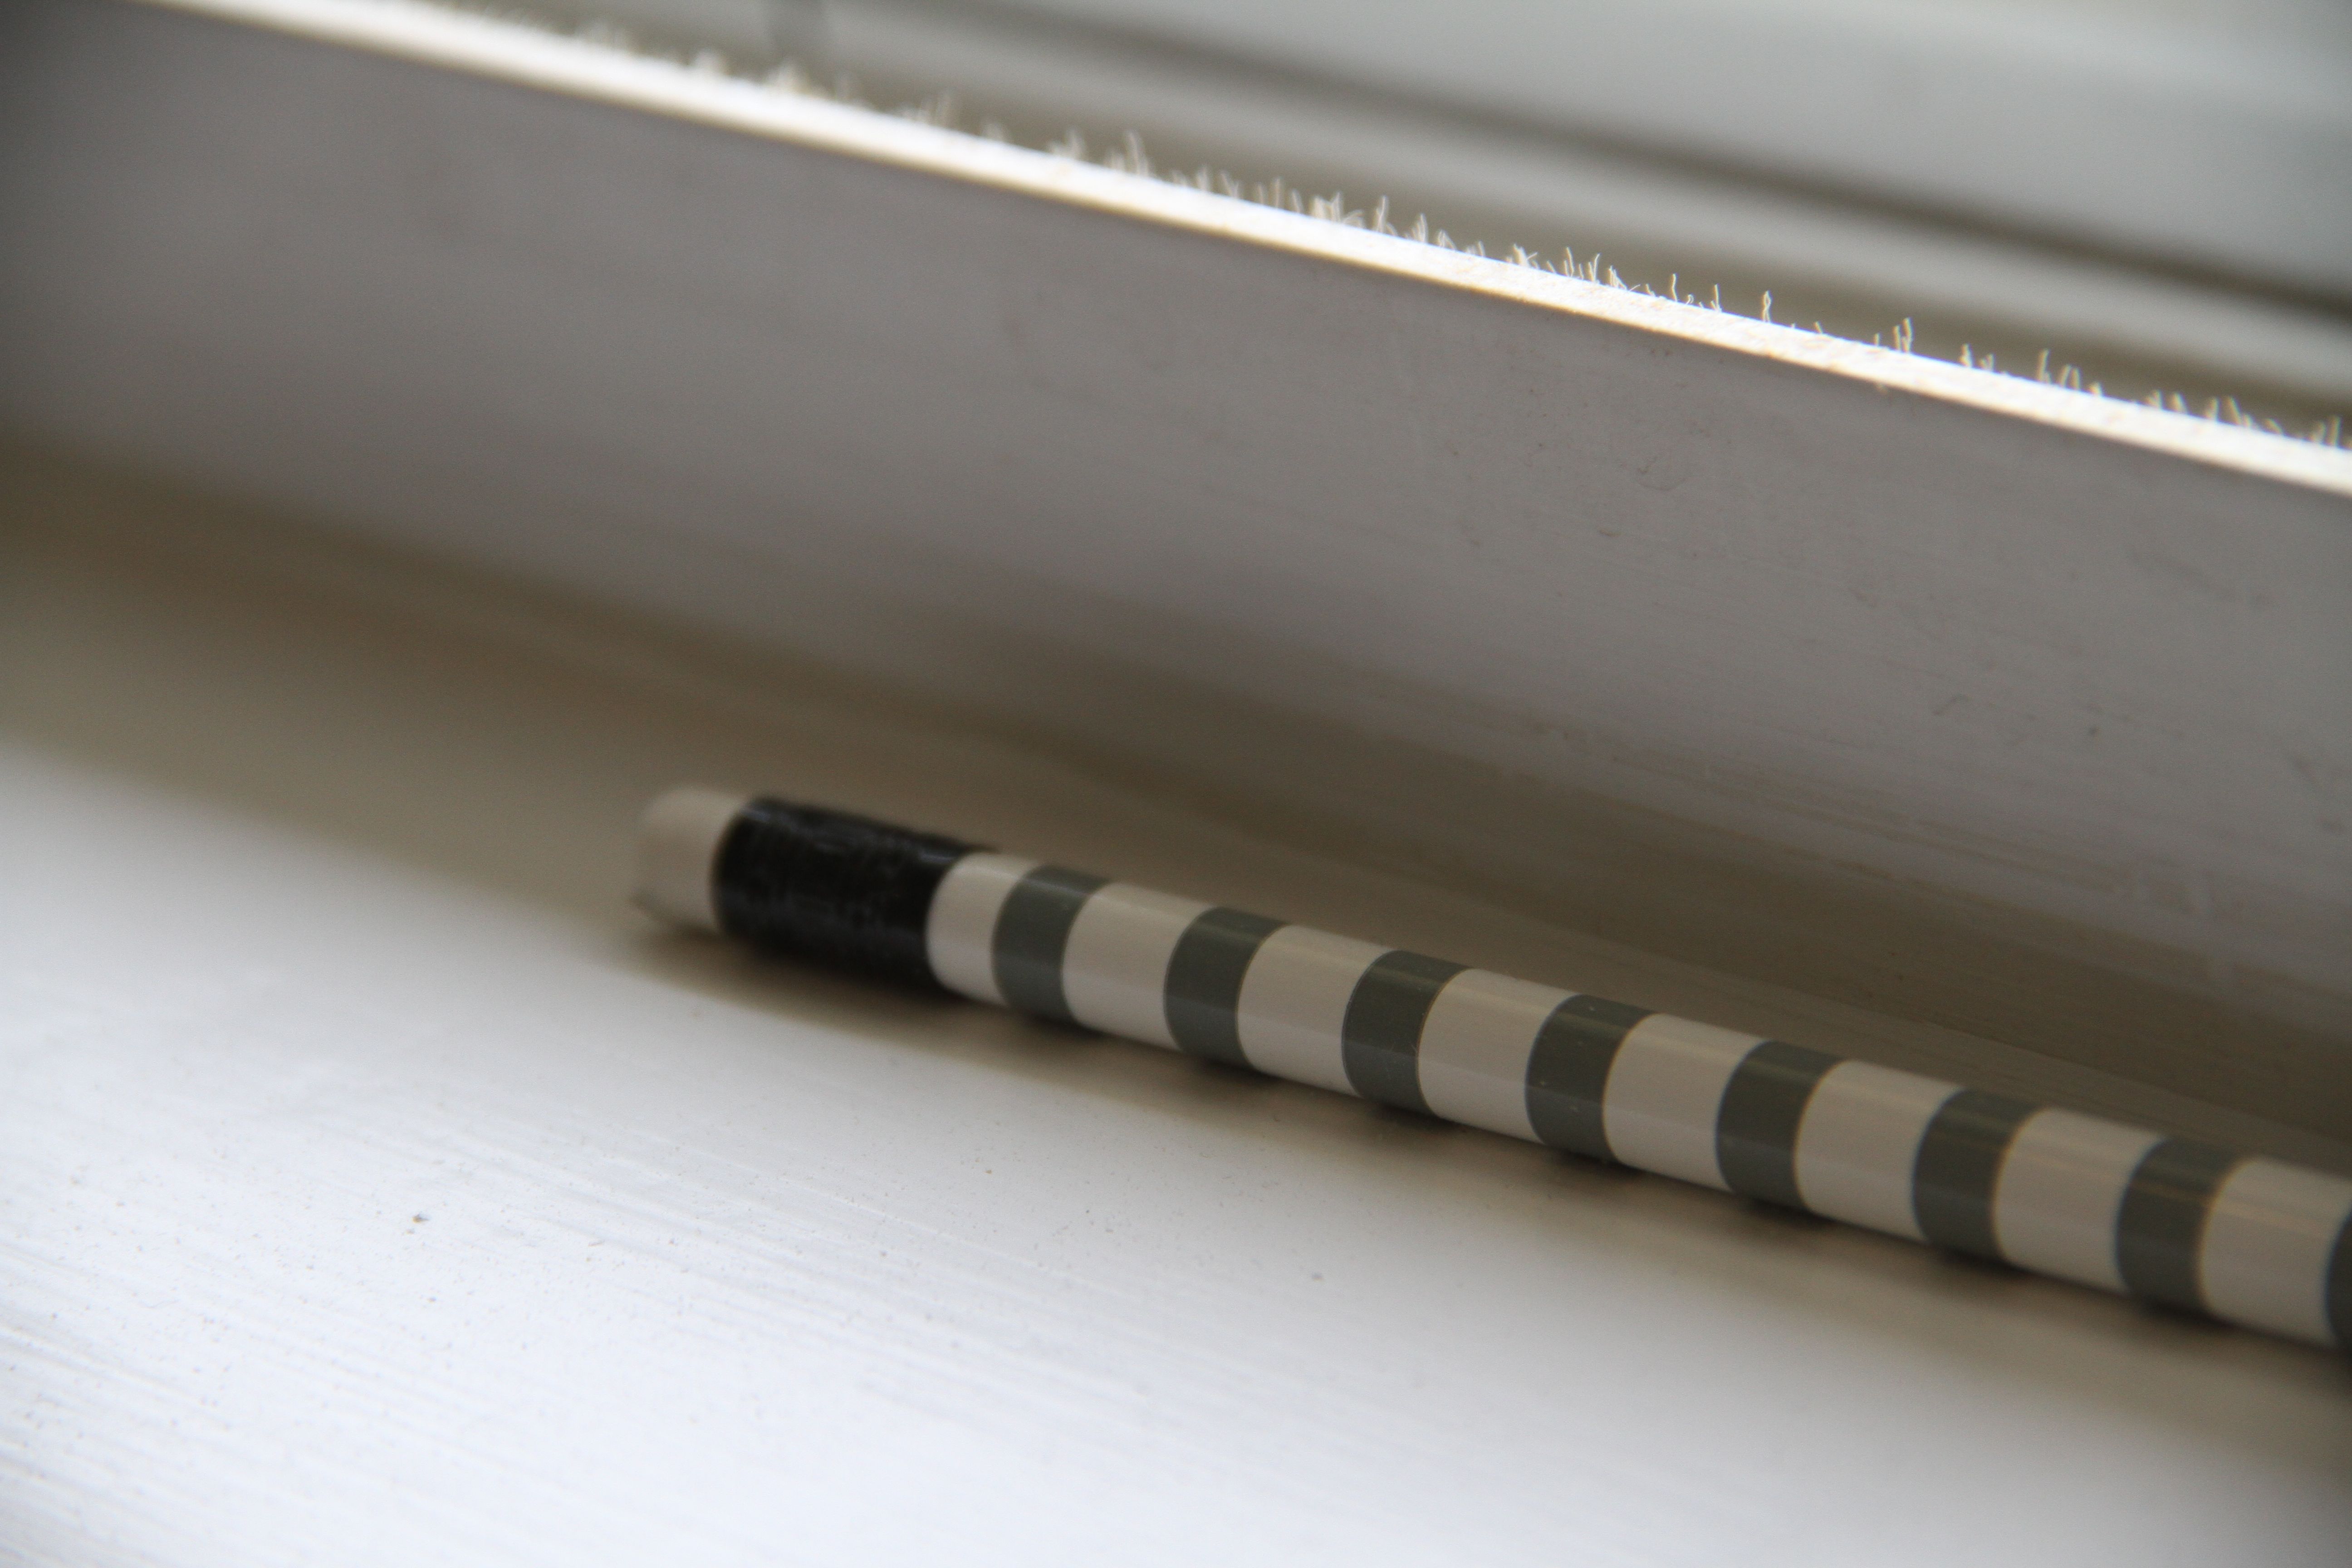 This pencil may or may not have influenced my design. Actually, it may just represent what I like: neutrals, graphic patterns, classic lines, and a touch of the unexpected.